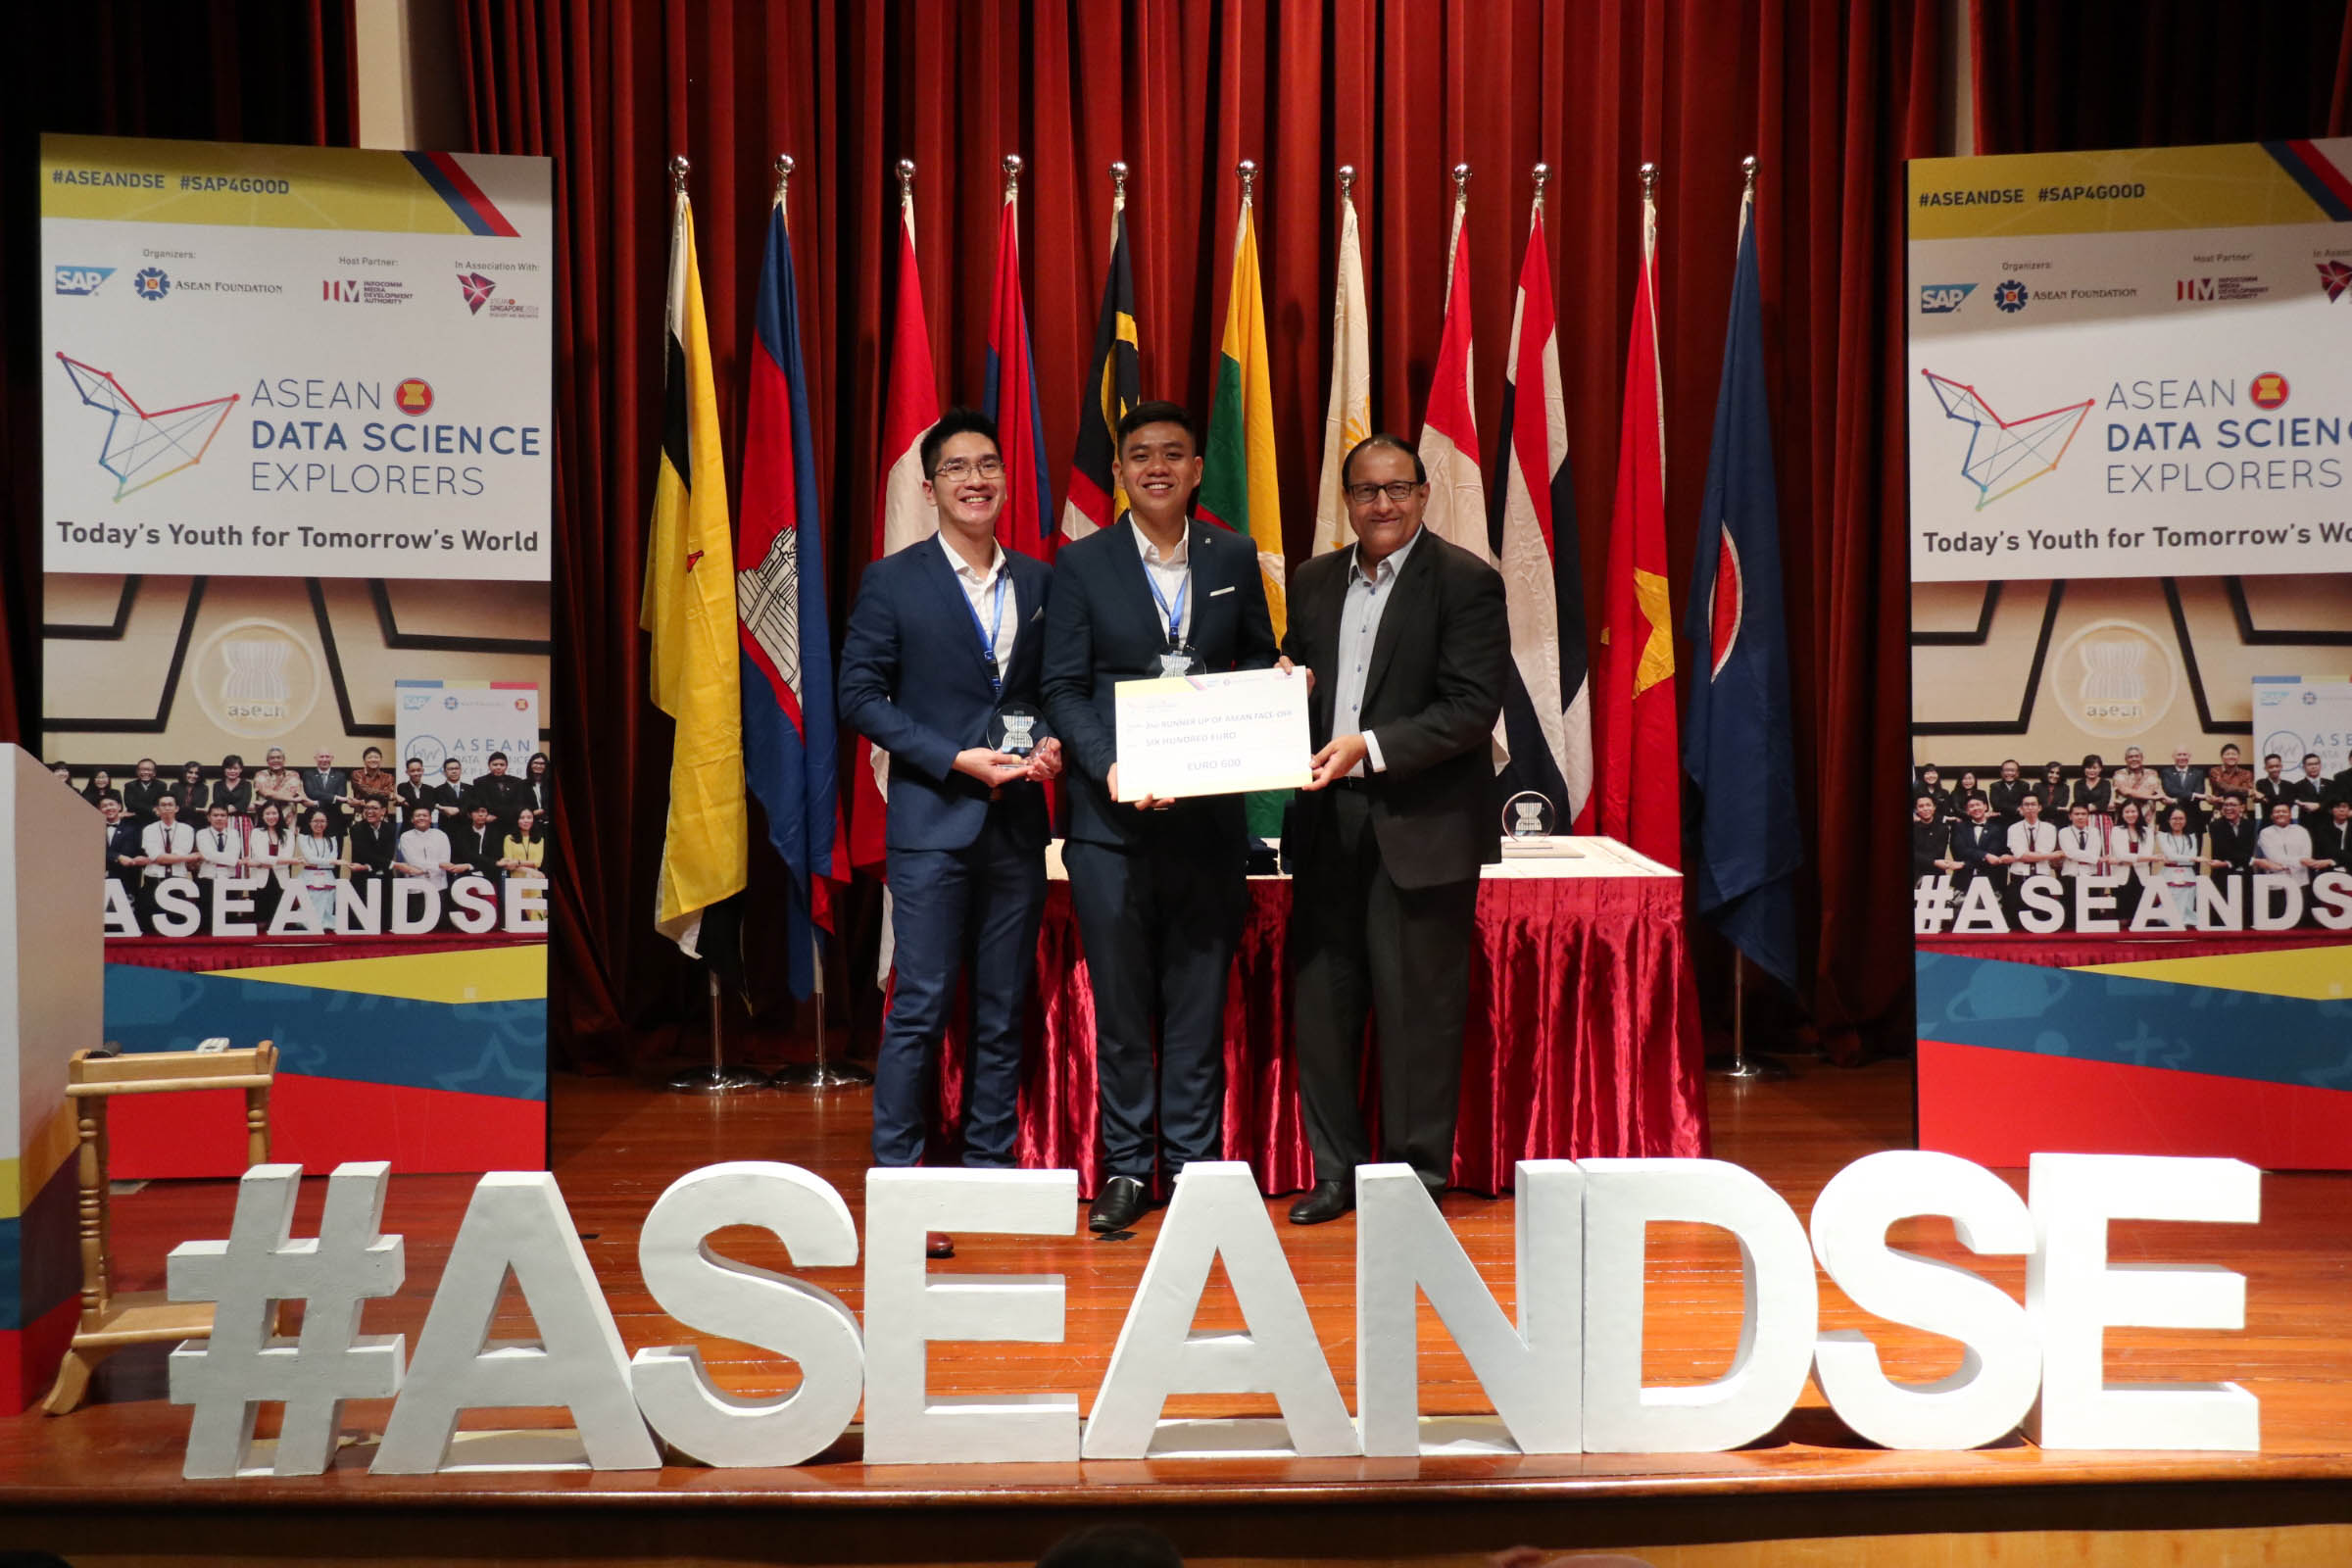 Singapore’s Minister for Communications and Information, S. Iswaran, presenting the third-place award to two RMIT Vietnam students, Nguyen Van Thuan and Mai Thanh Tung, in Singapore.